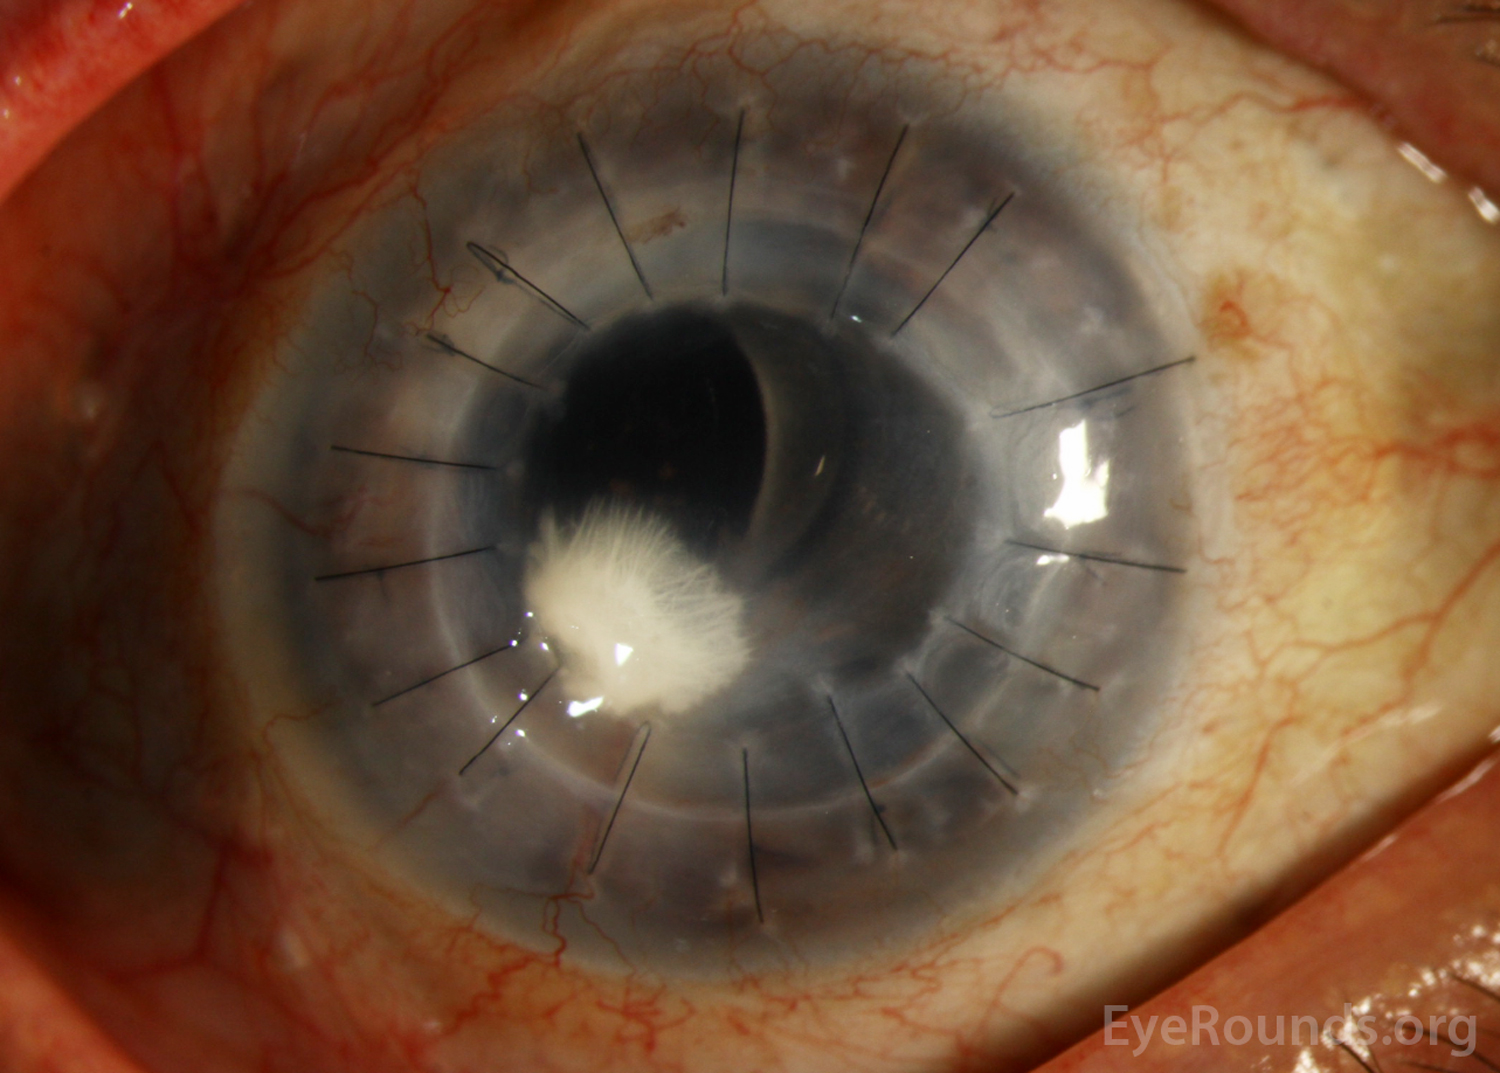 Slit lamp photograph of the right eye shows mild injection, penetrating keratoplasty graft